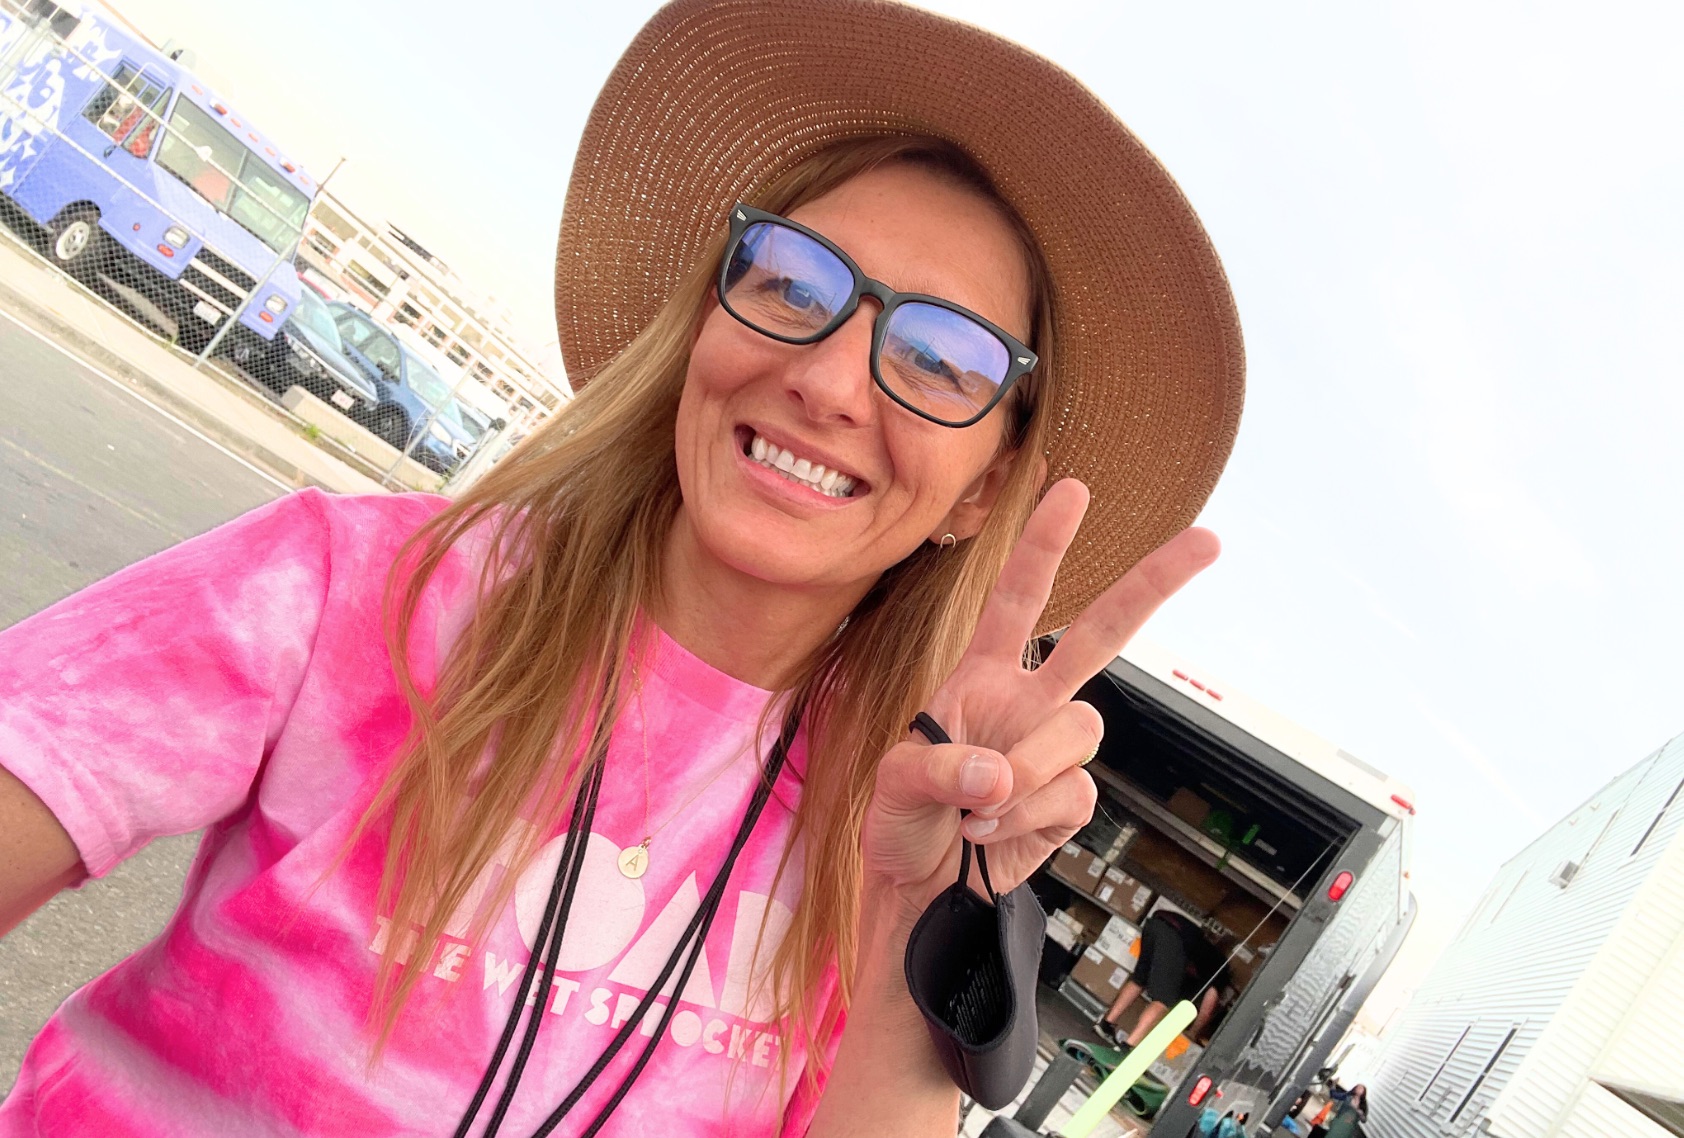 A woman with a floppy hat wearing a pink t-shirt